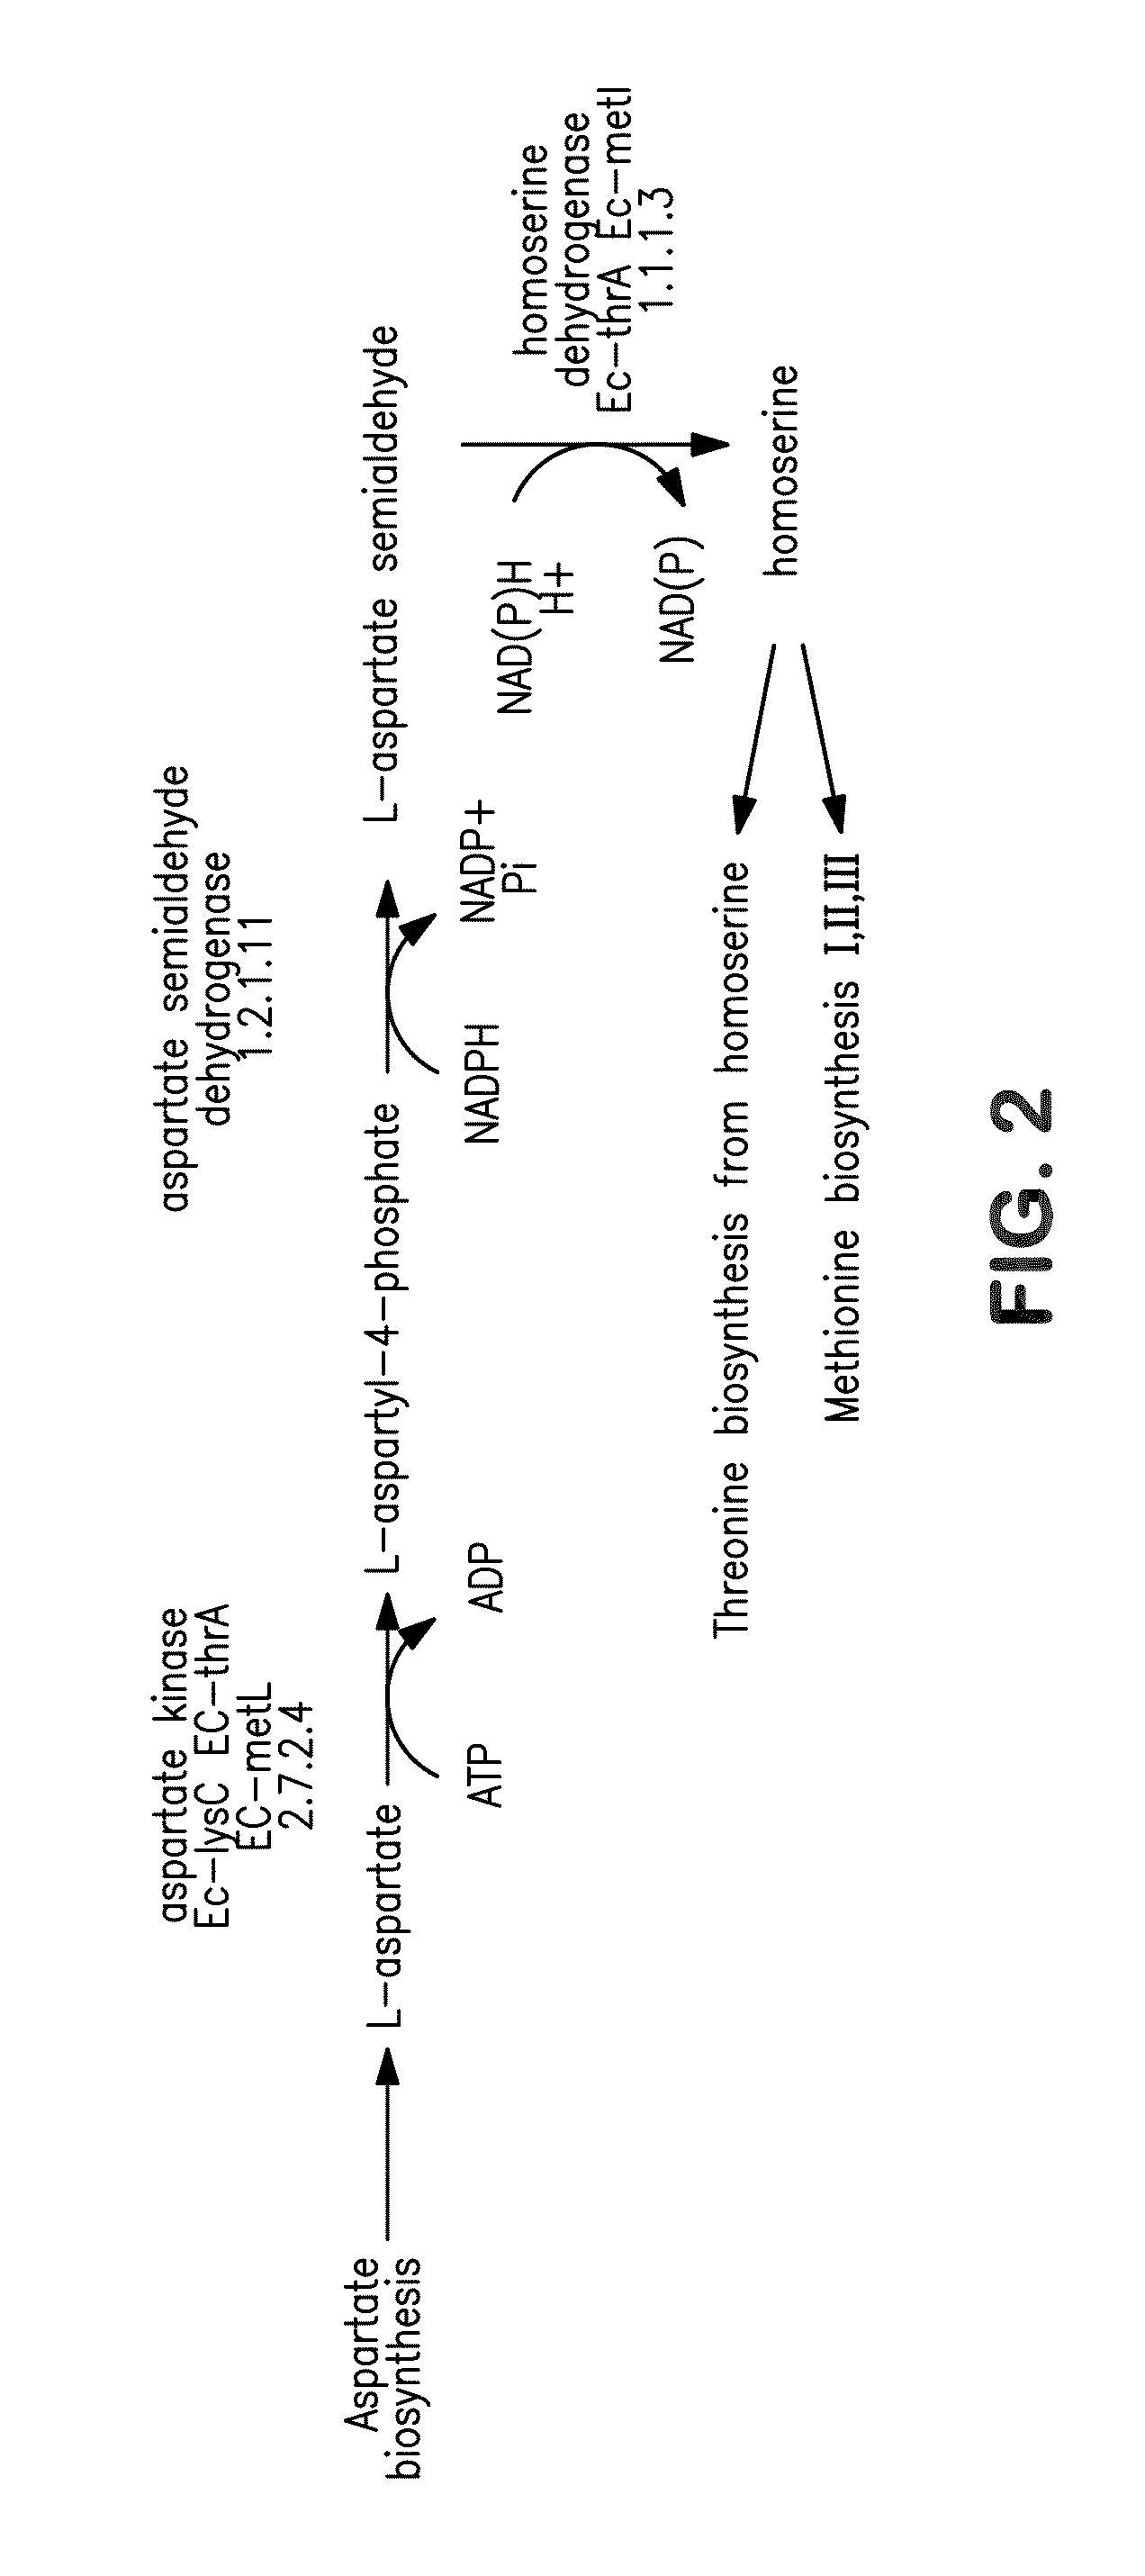 Microorganisms for producing 1,4-butanediol and methods related thereto